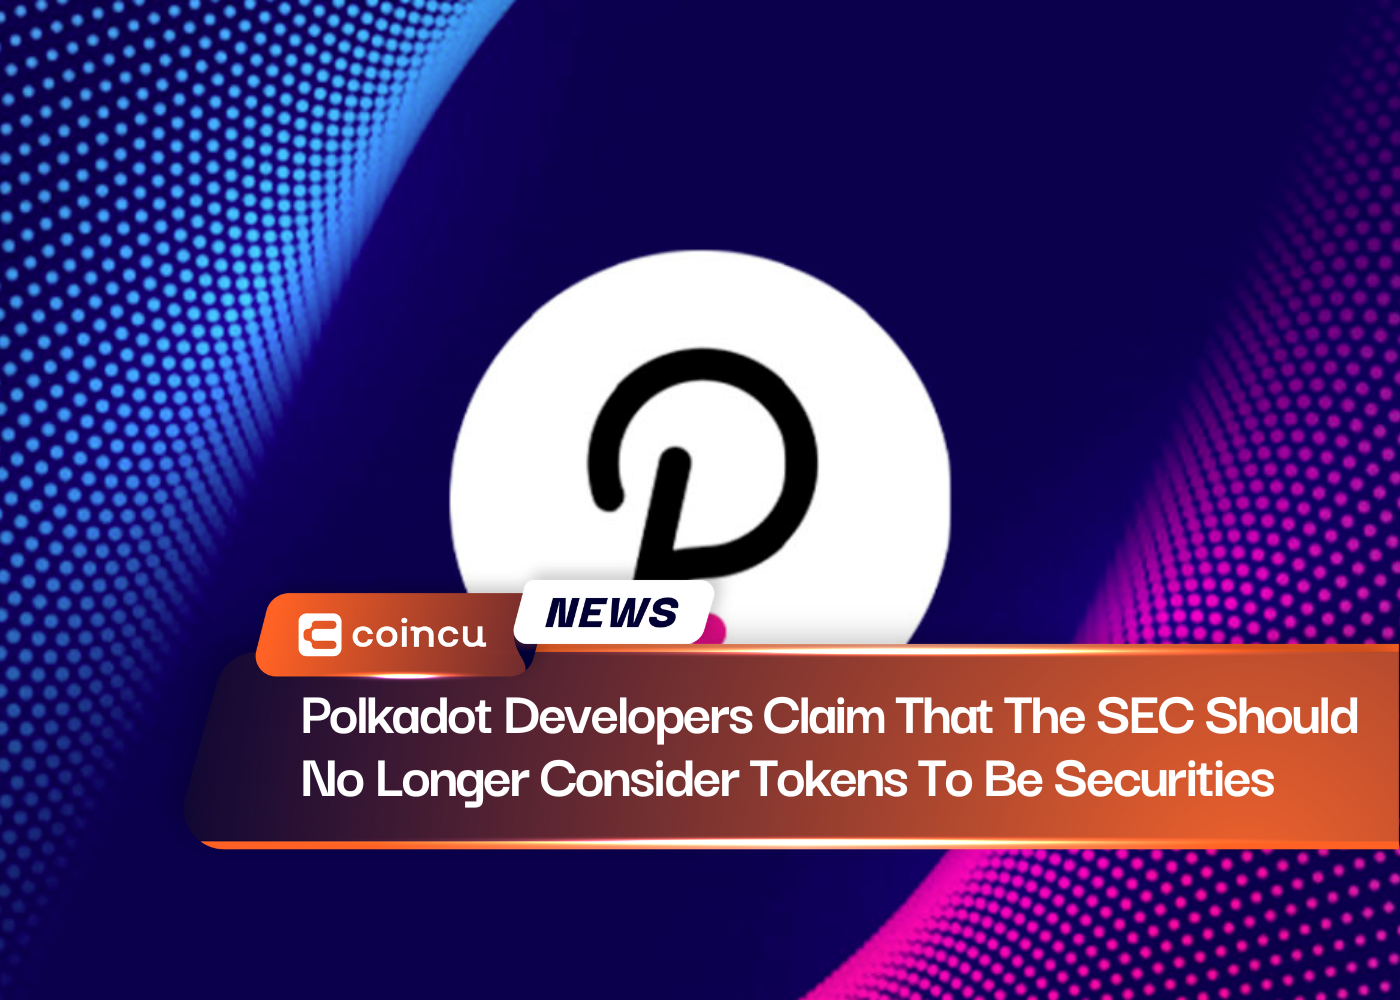 Polkadot Developers Claim That The SEC Should No Longer Consider Tokens To Be Securities